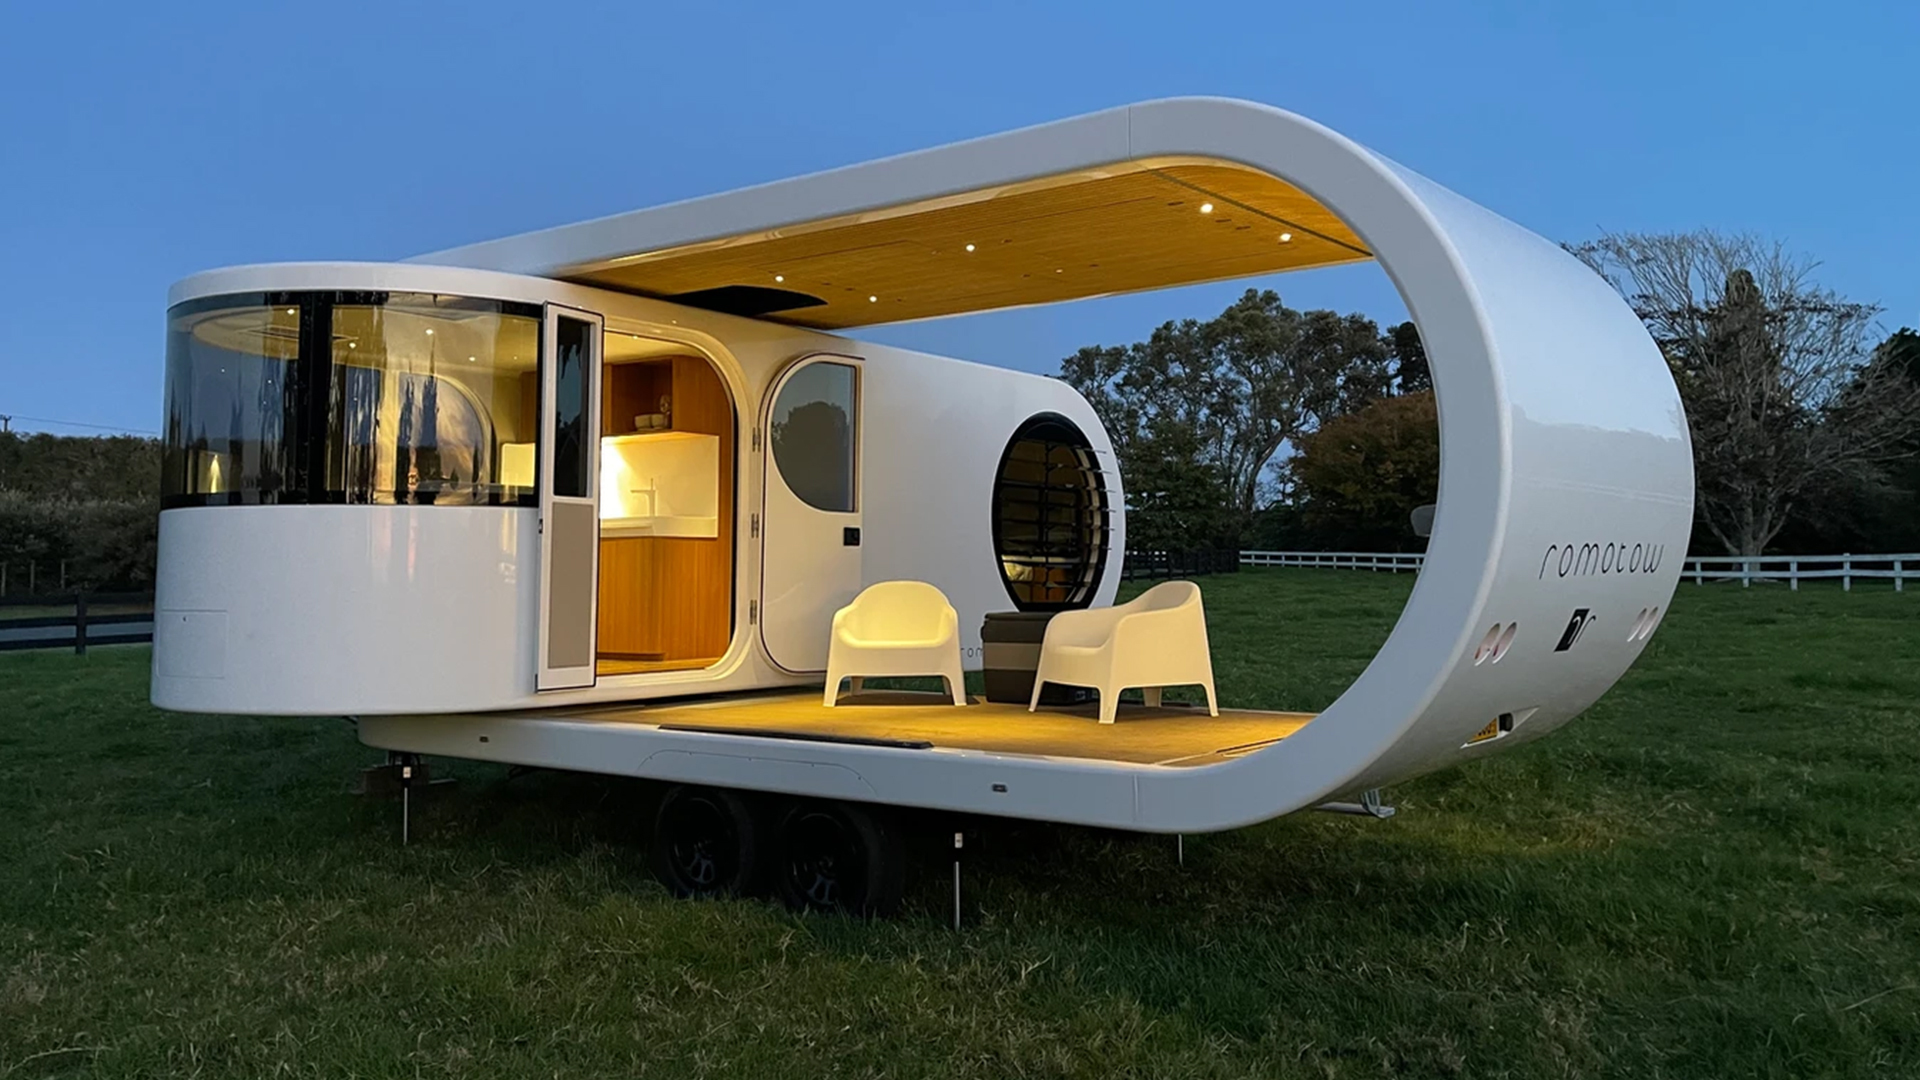 Romotow T8 Is Futuristic Caravan That Swivels Like A Giant USB Stick And Costs $268K | Carscoops